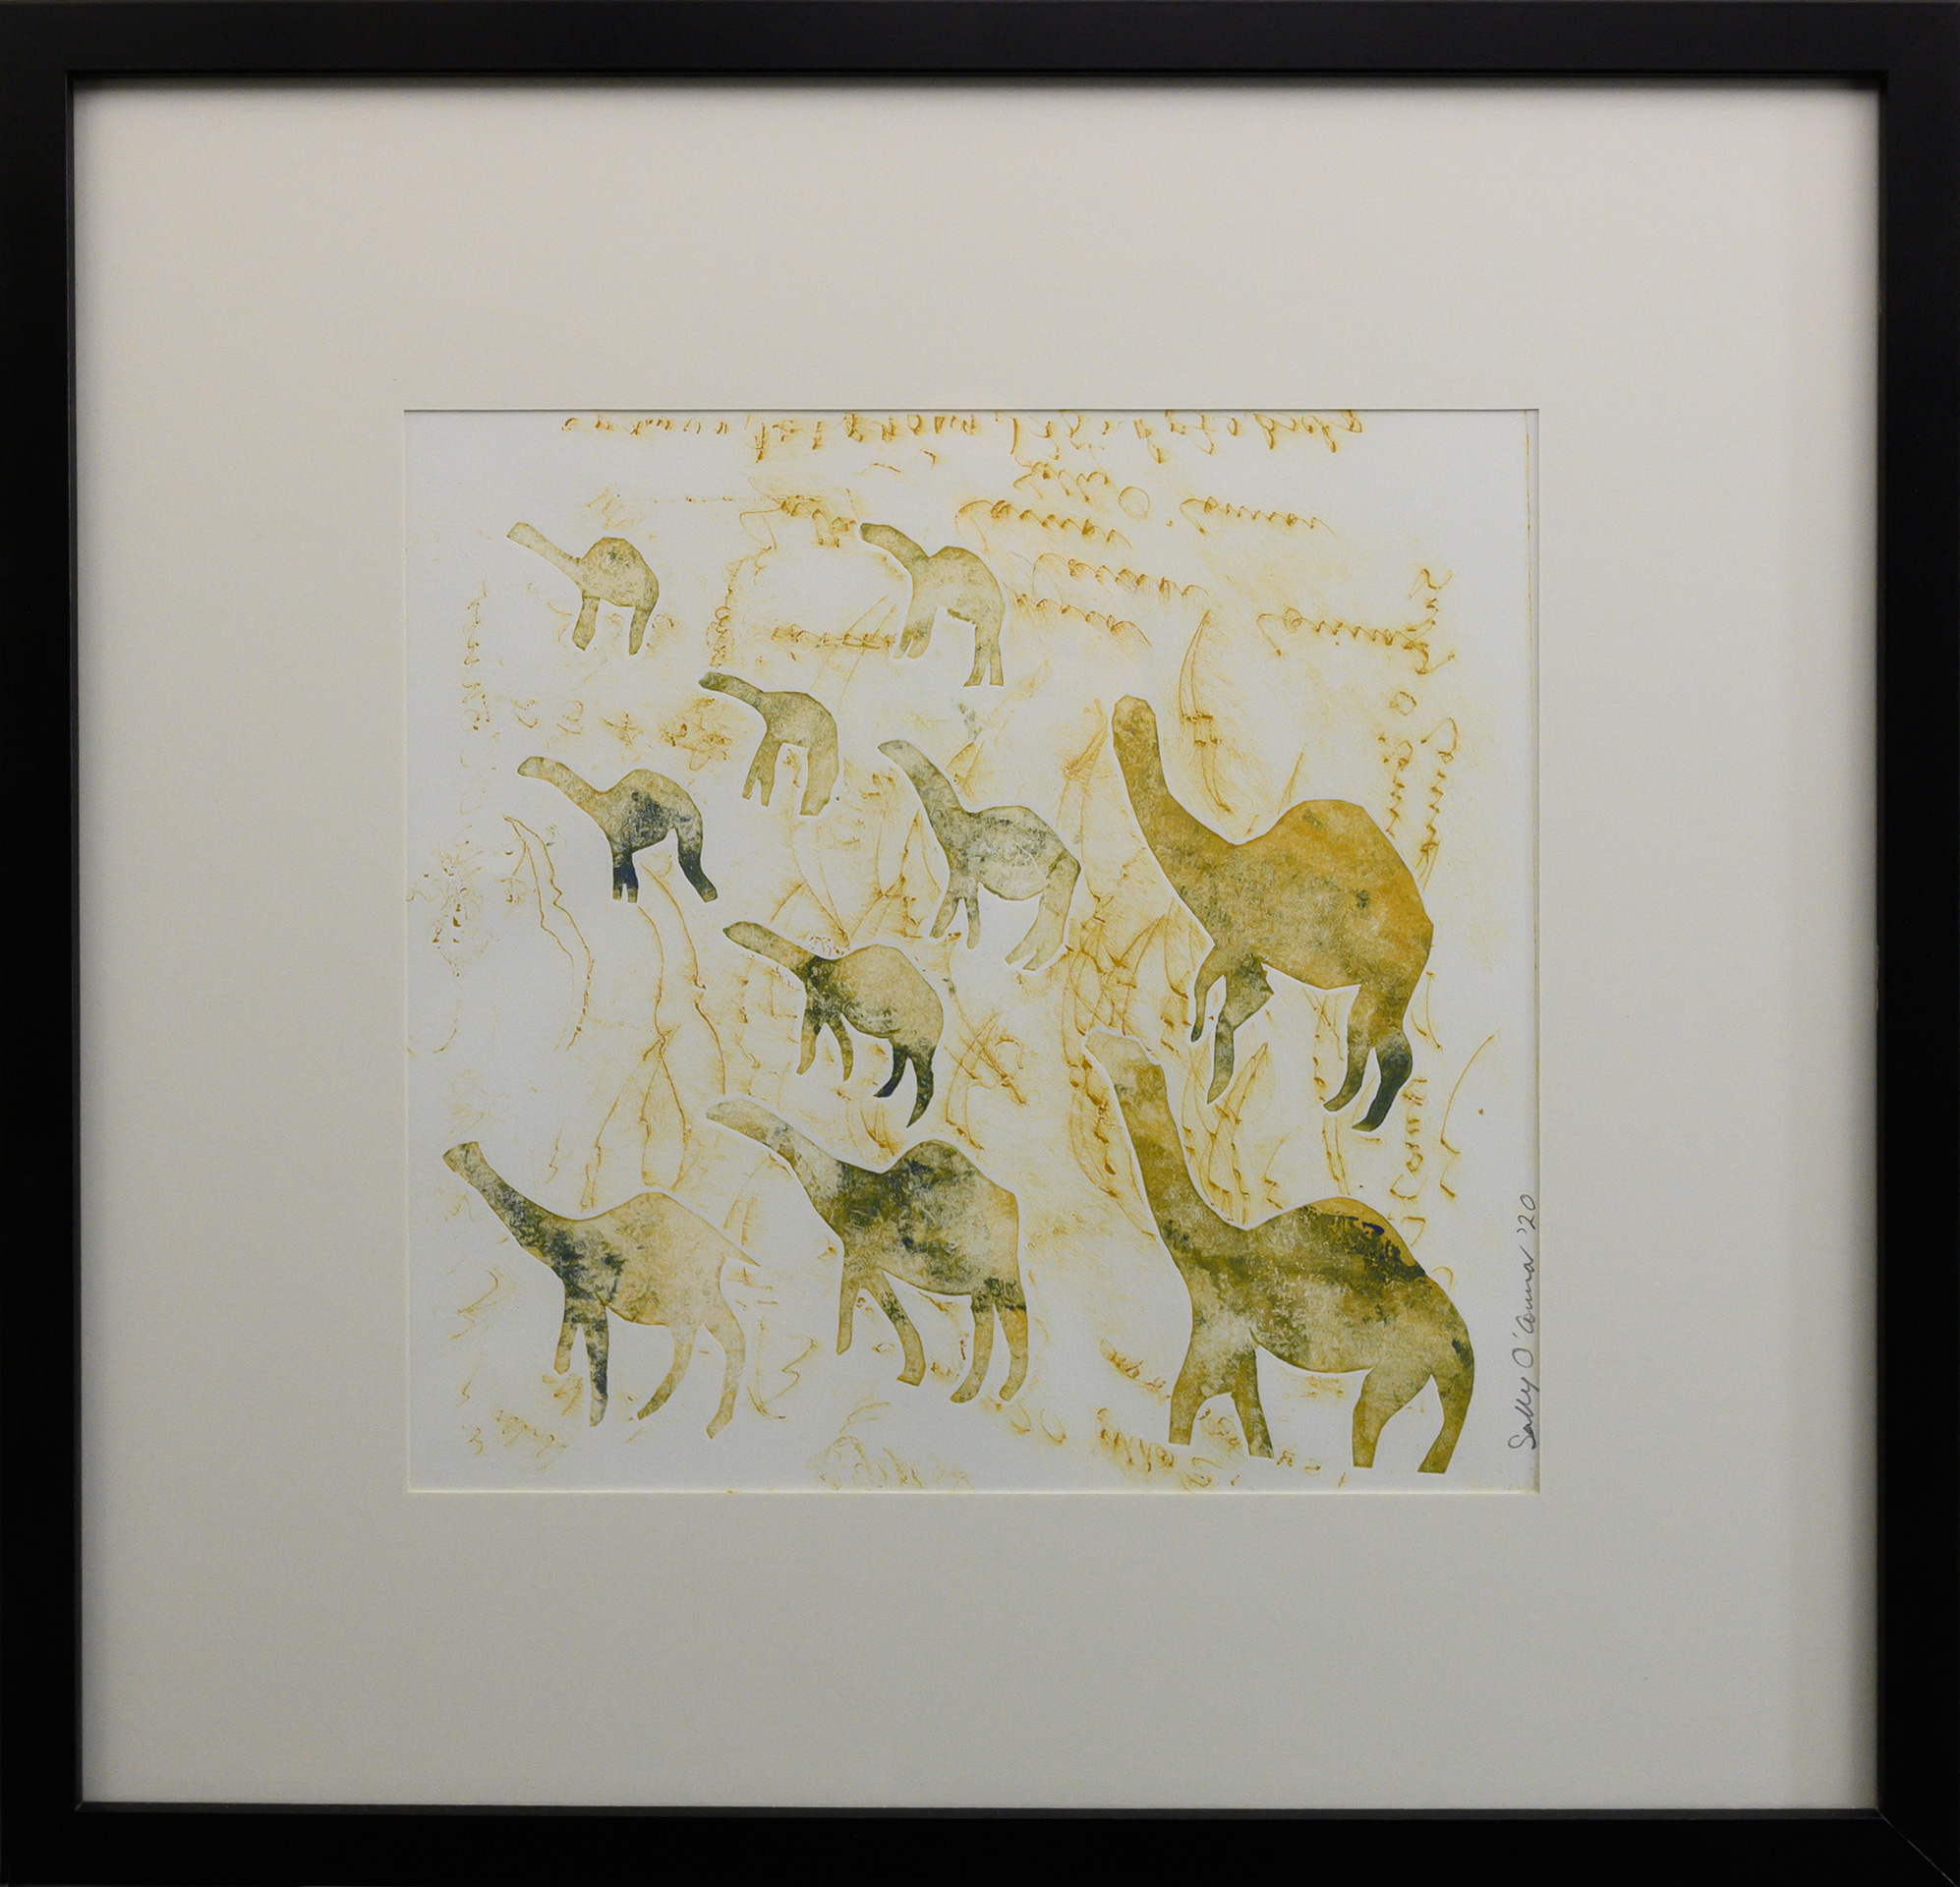 Framed artwork by Sally OConnor of simplistic yellow/green camels